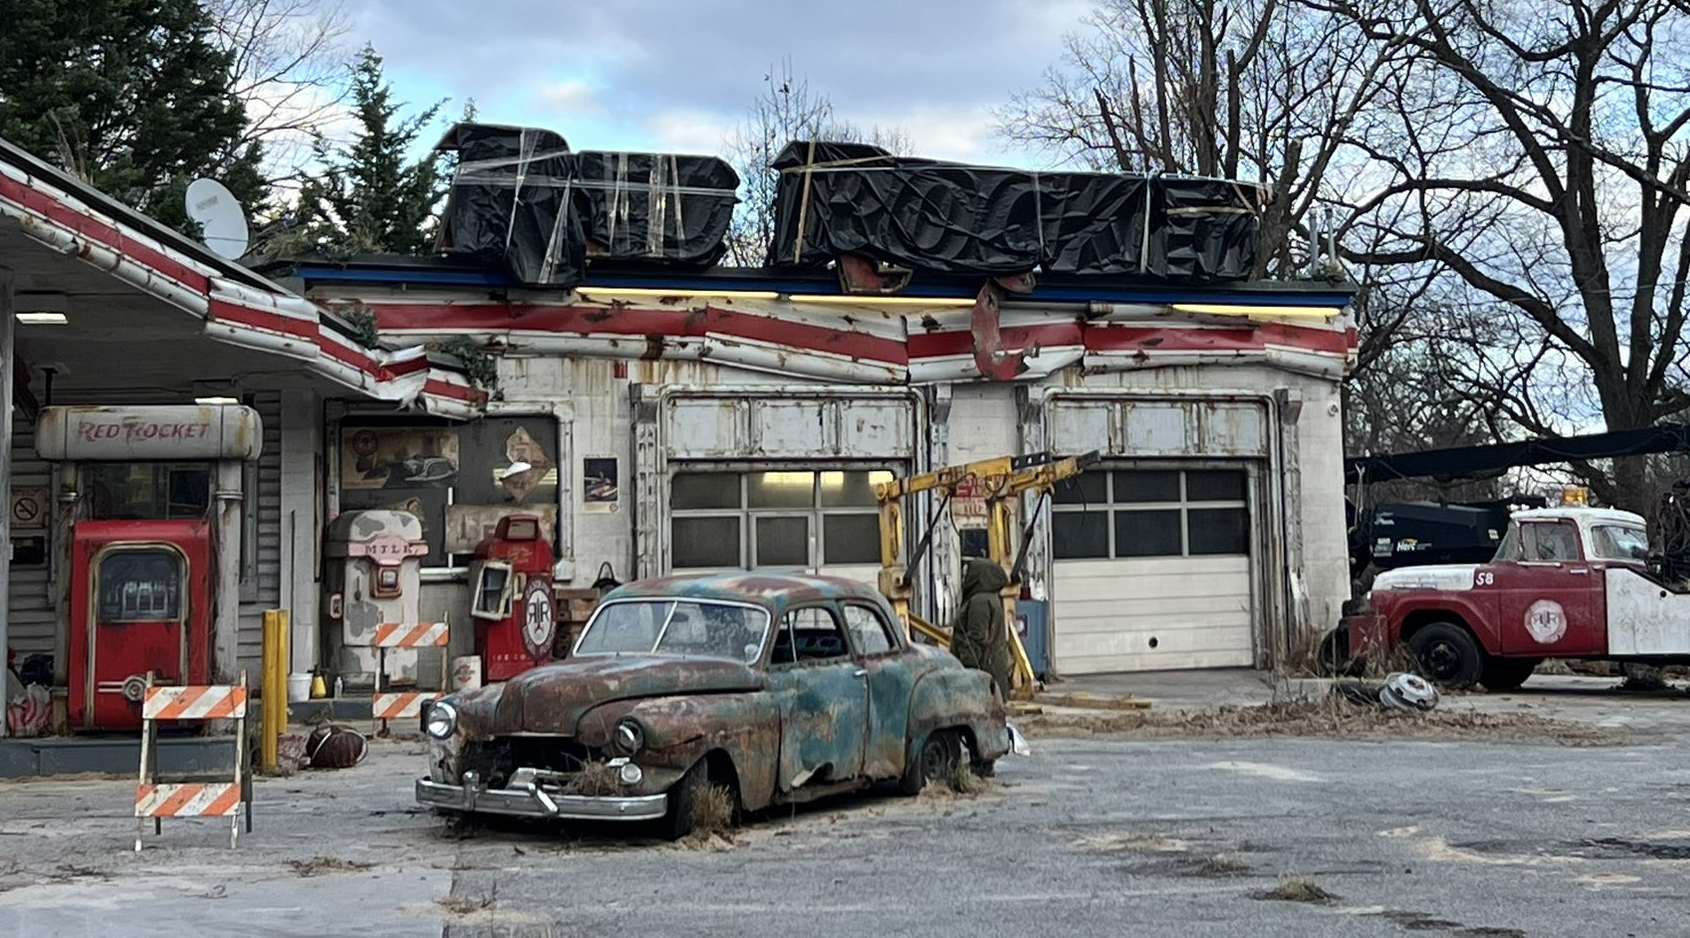  New Fallout TV series set photos show iconic Red Rocket gas station 